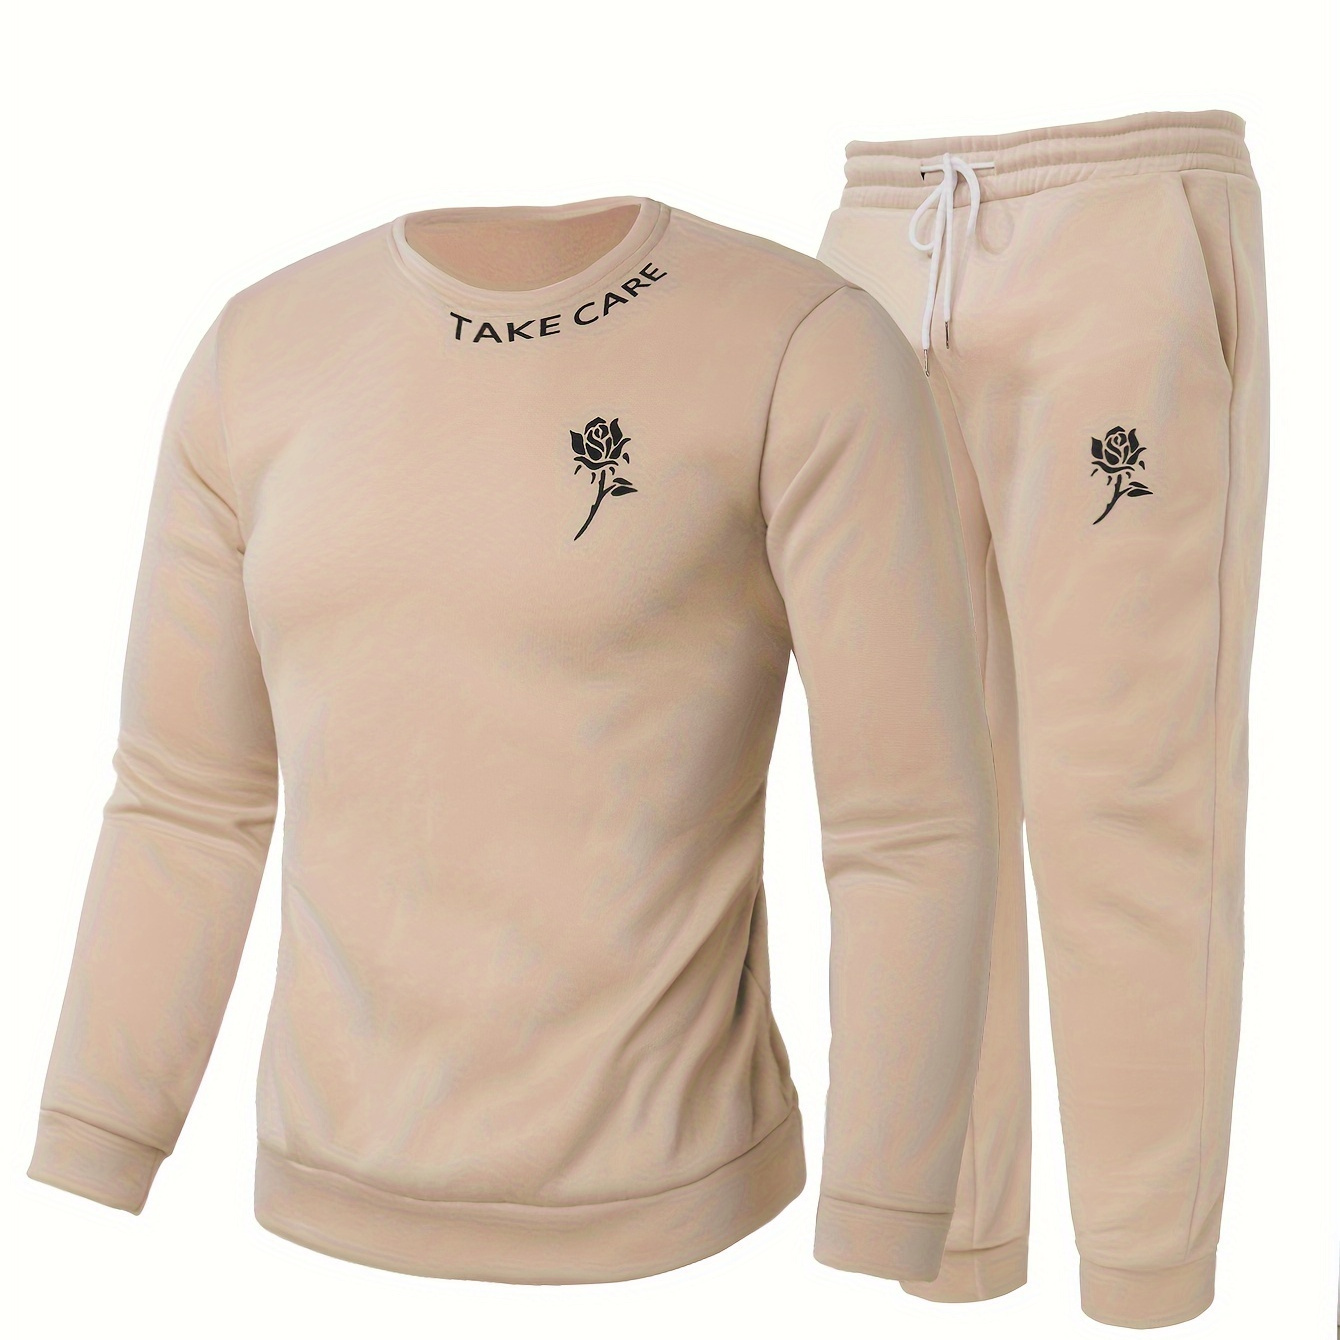 

Rose Print, Men's 2pcs Outfits, Casual Crew Neck Long Sleeve Pullover Sweatshirt And Drawstring Sweatpants Joggers Set For Spring Fall, Men's Clothing